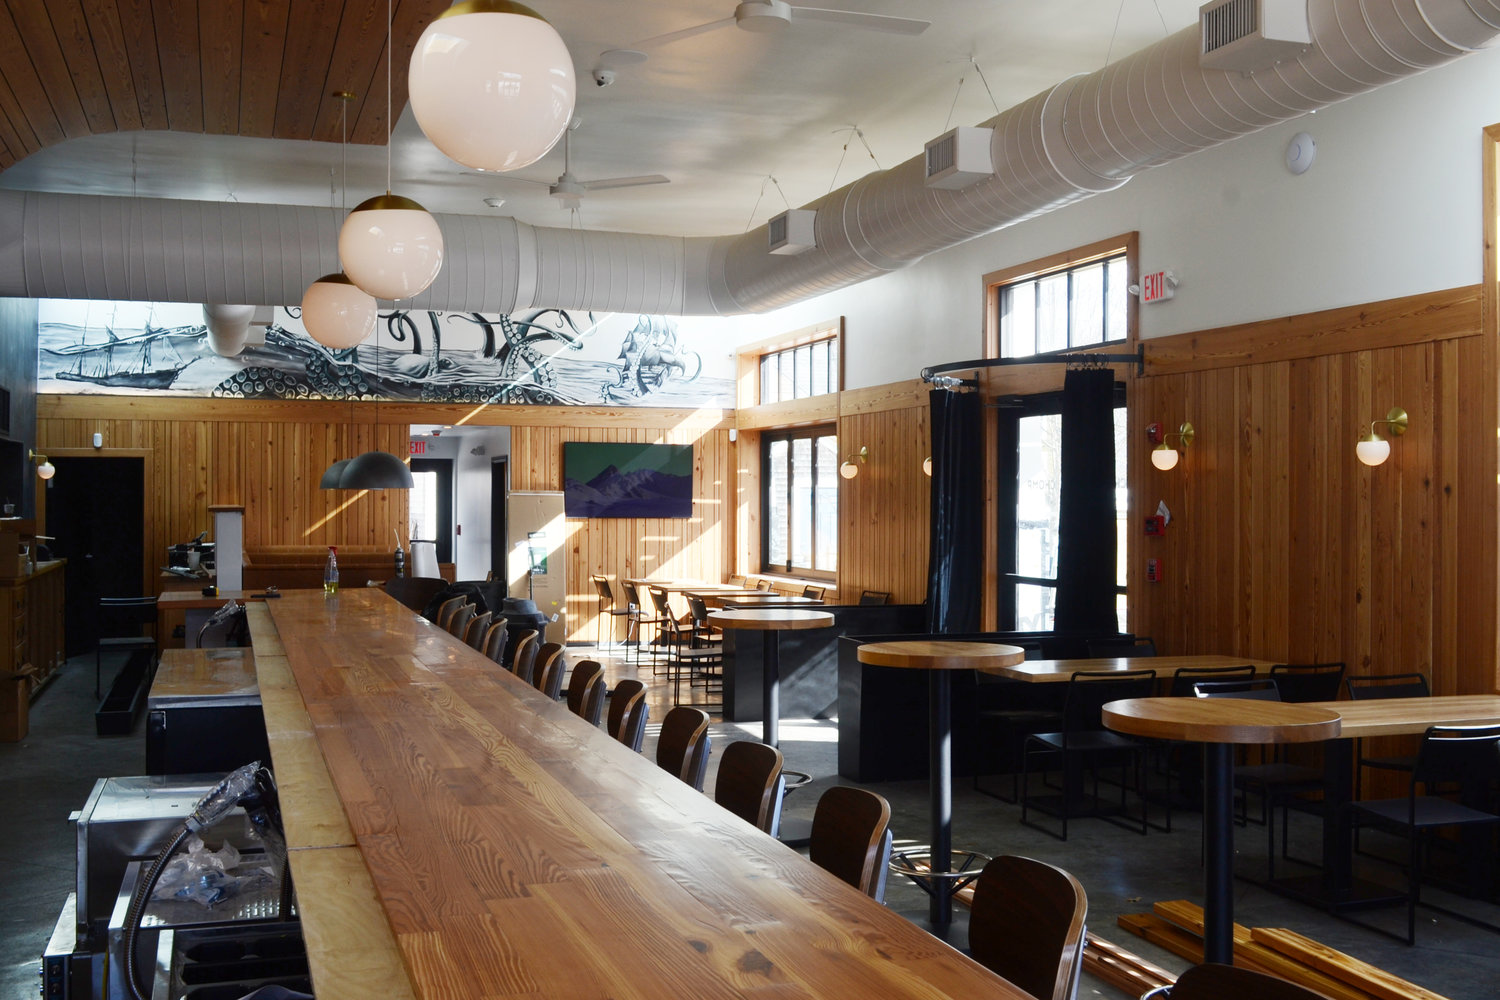 Natural light shines illuminates the interior of the new restaurant space, which features seating for 60.